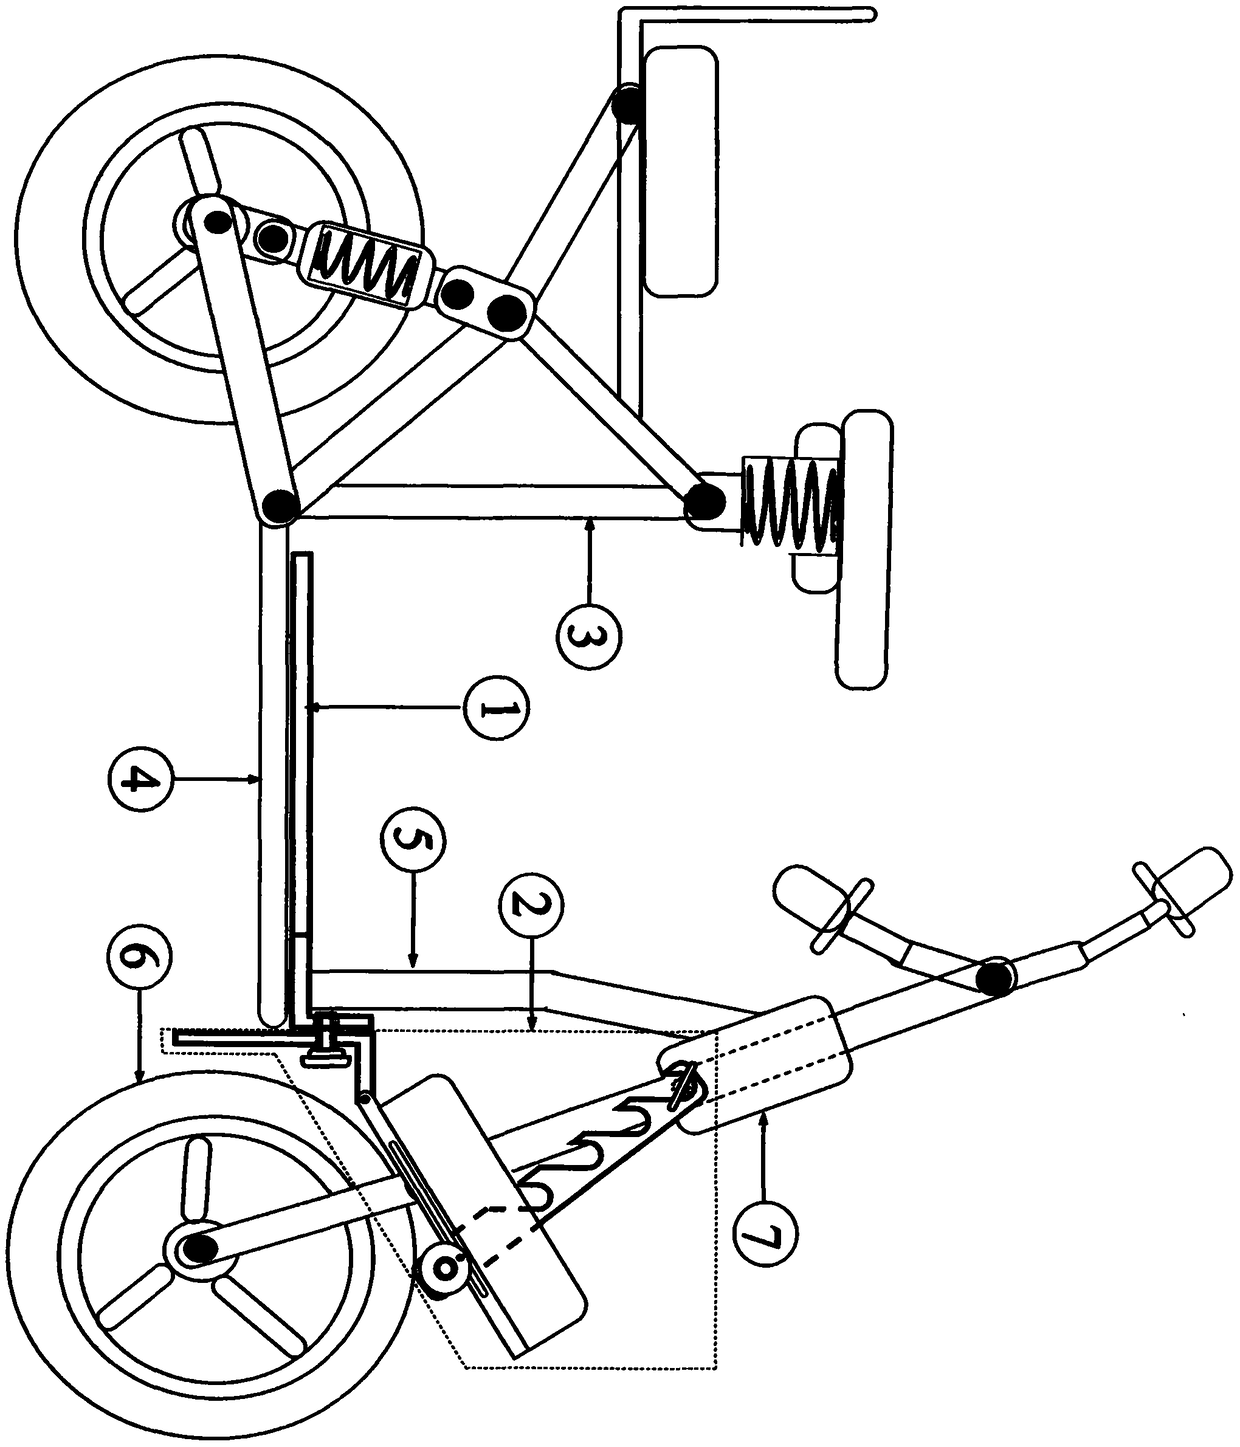 Dual-footboard device for electric two-wheeled/three-wheeled vehicles